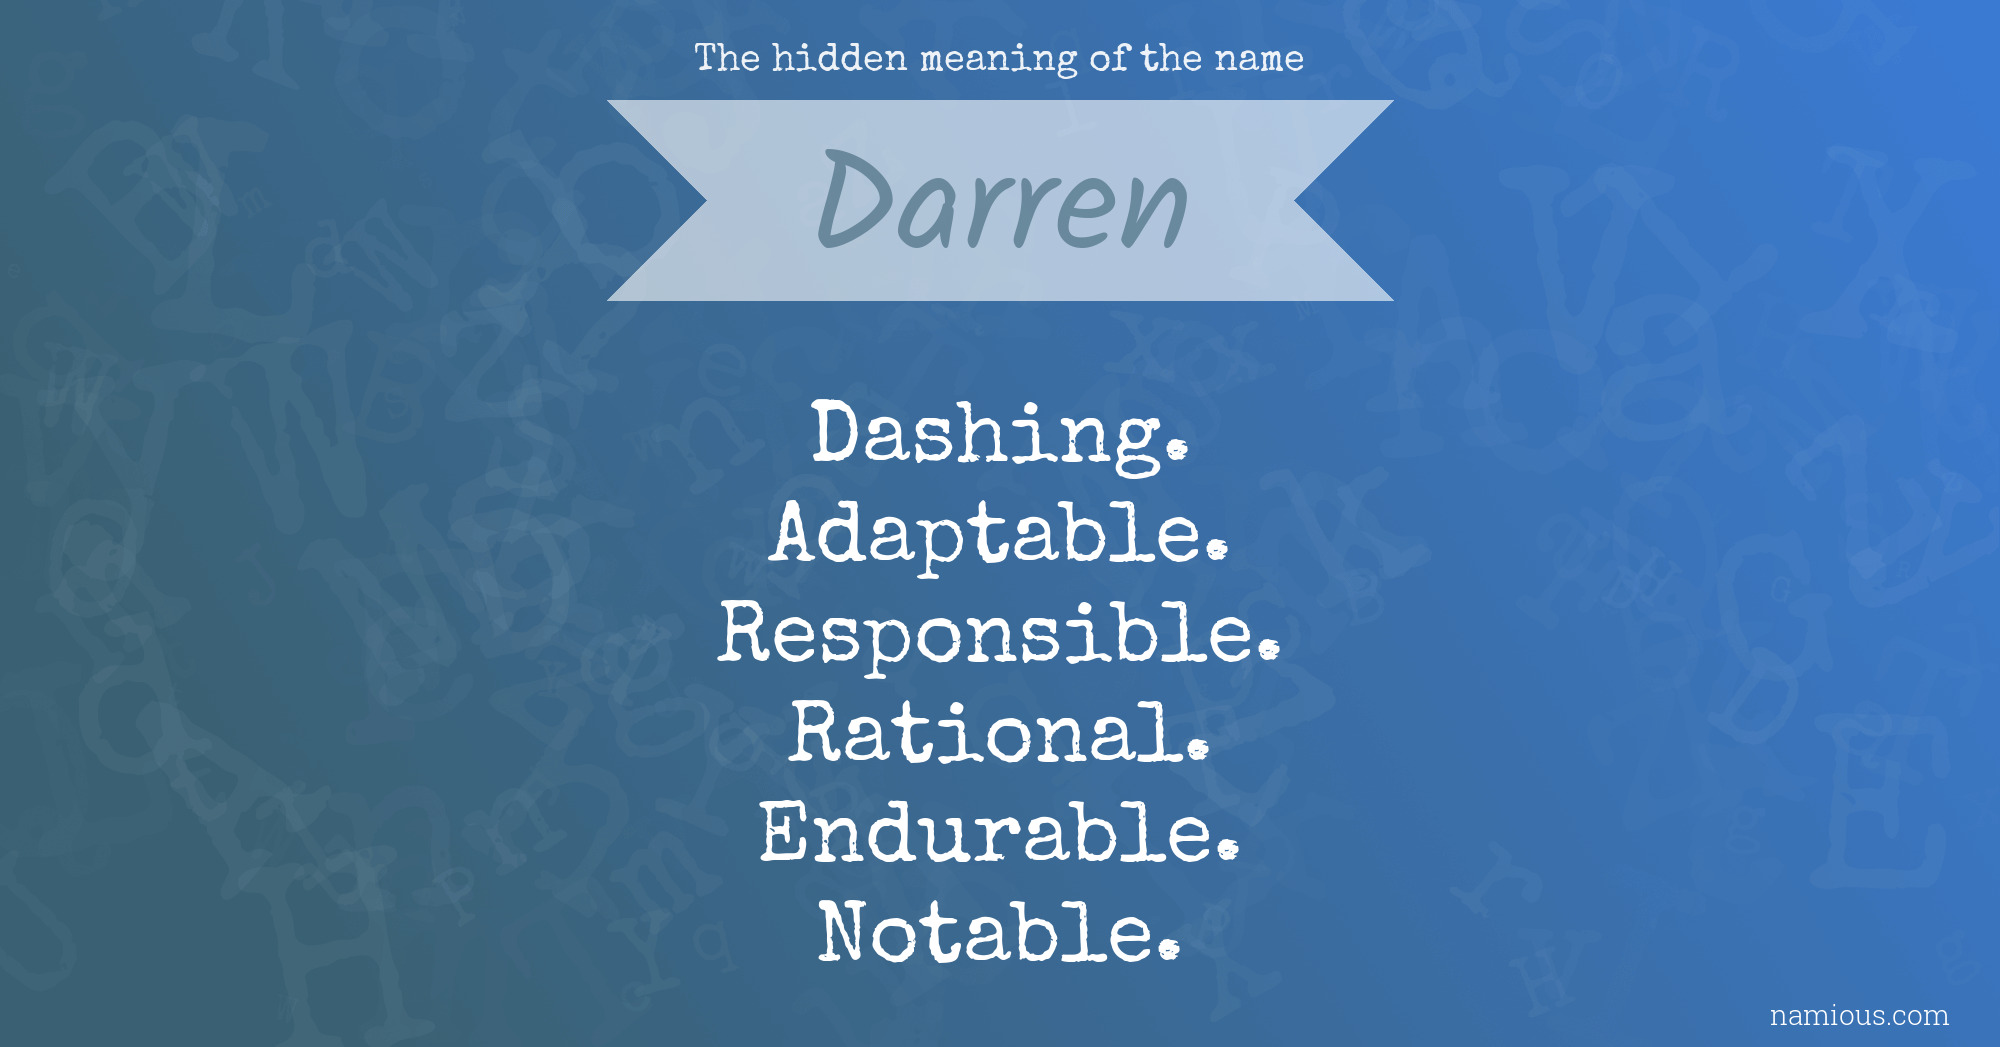 The hidden meaning of the name Darren